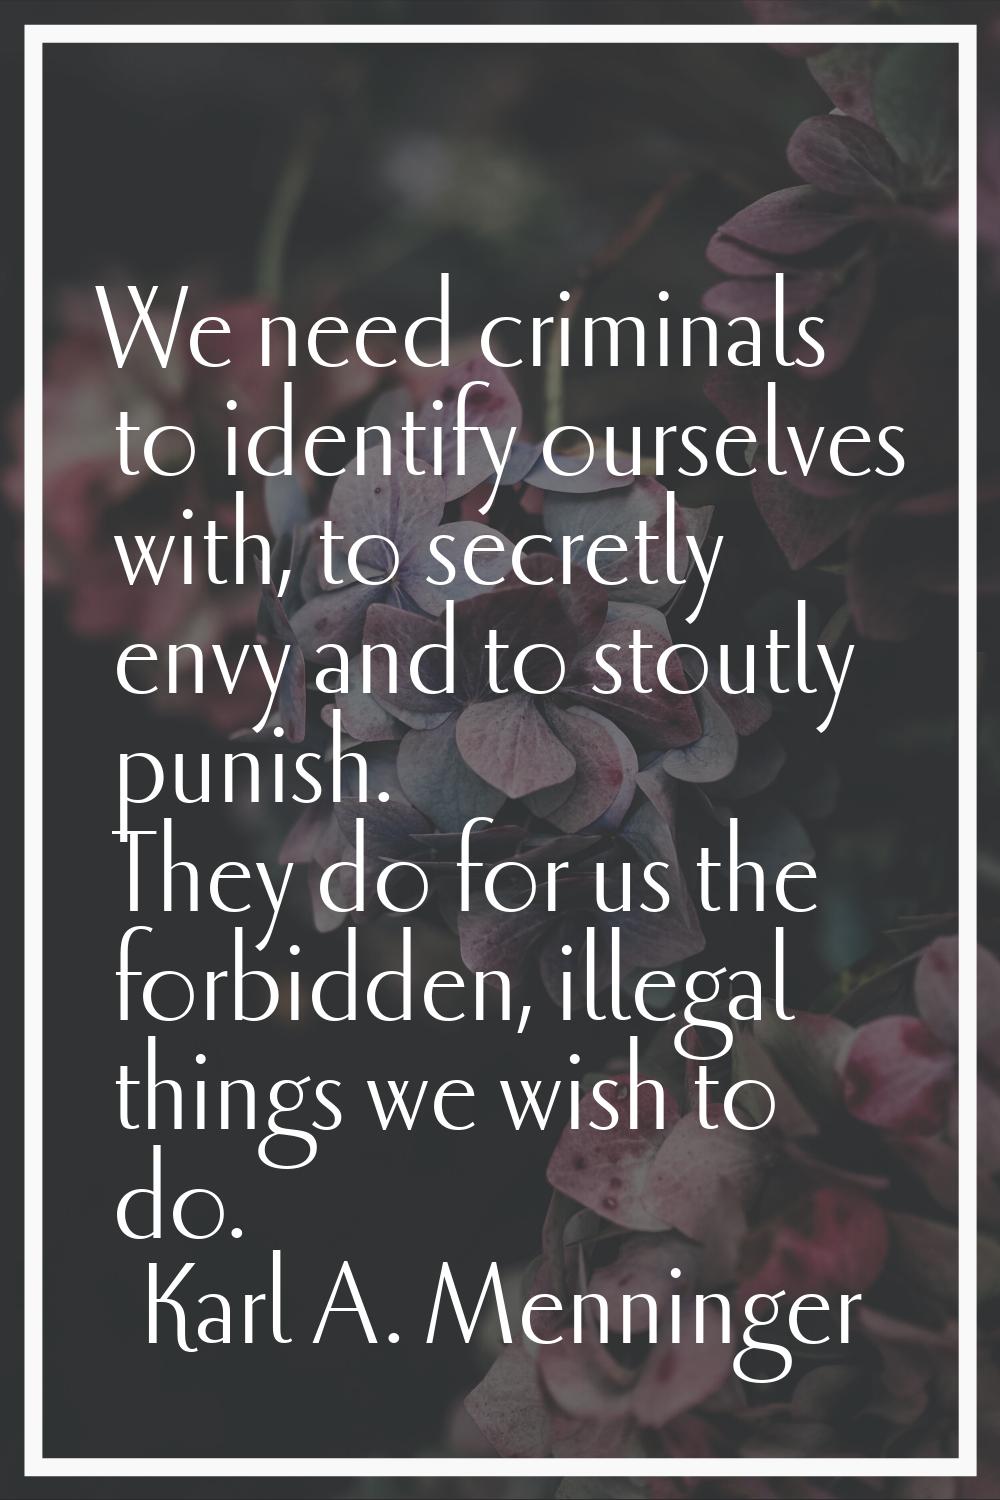 We need criminals to identify ourselves with, to secretly envy and to stoutly punish. They do for u